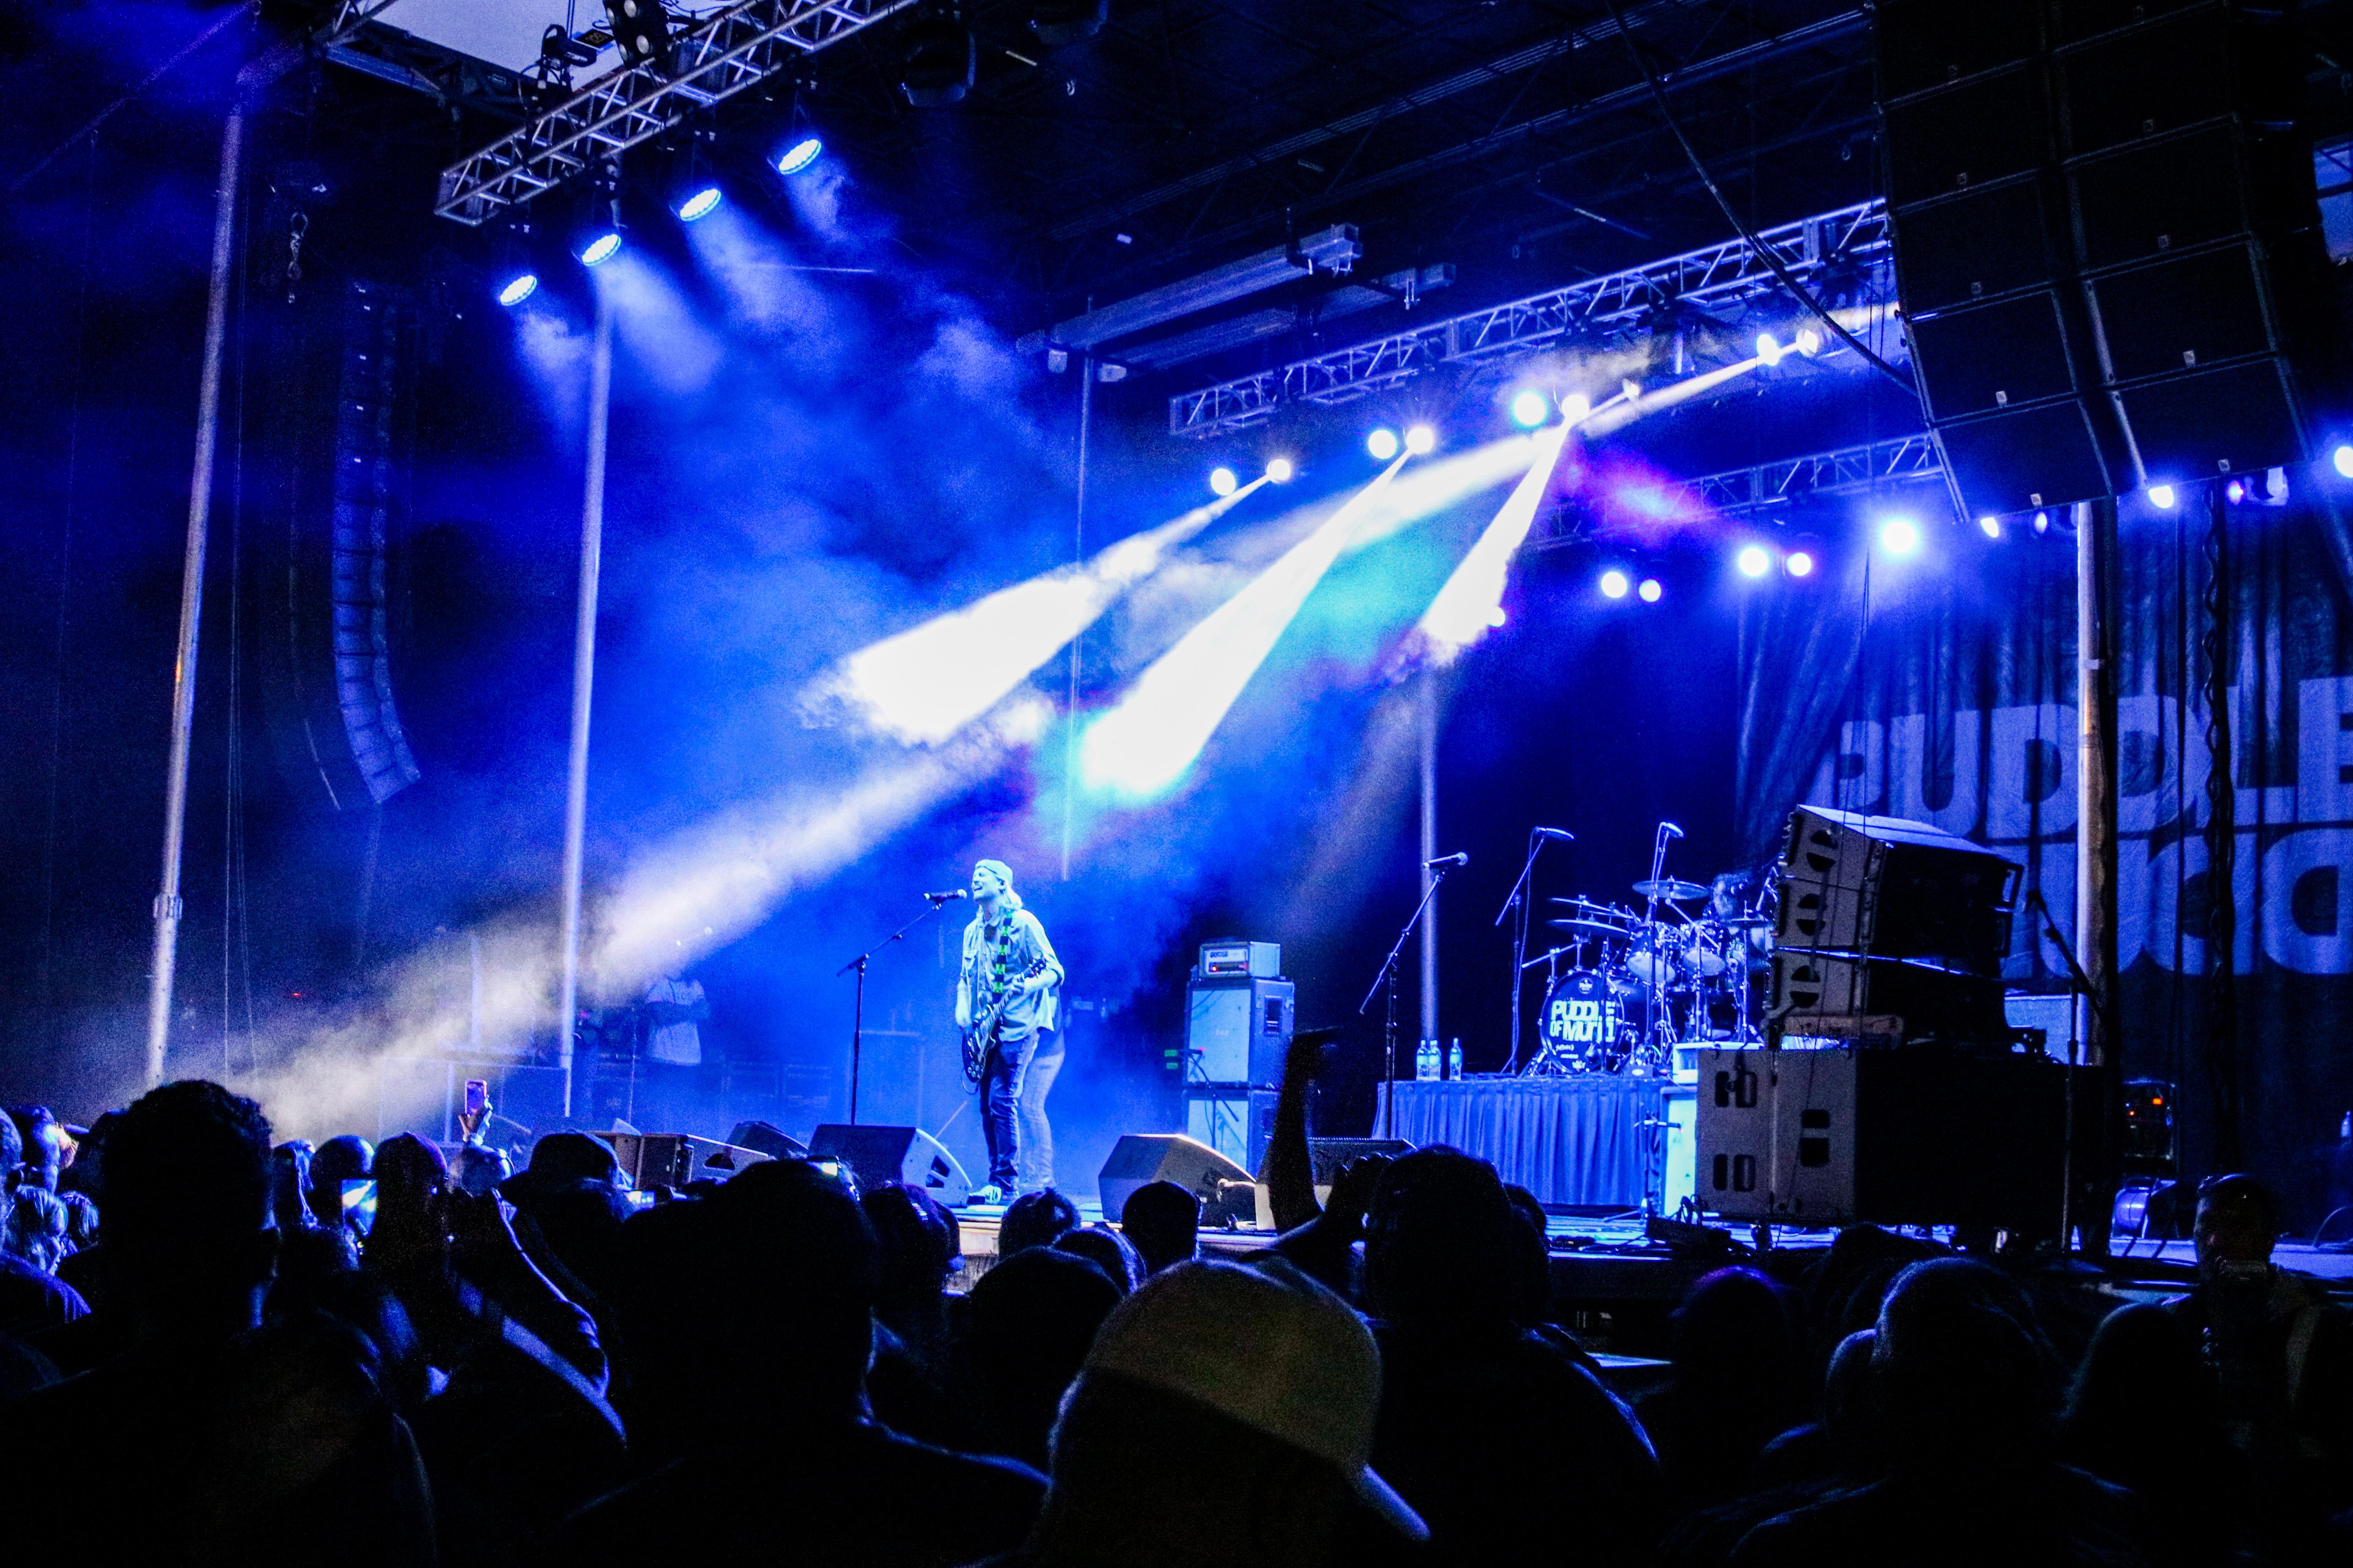 Muddfest 2019 activated Events Pro Systems Av